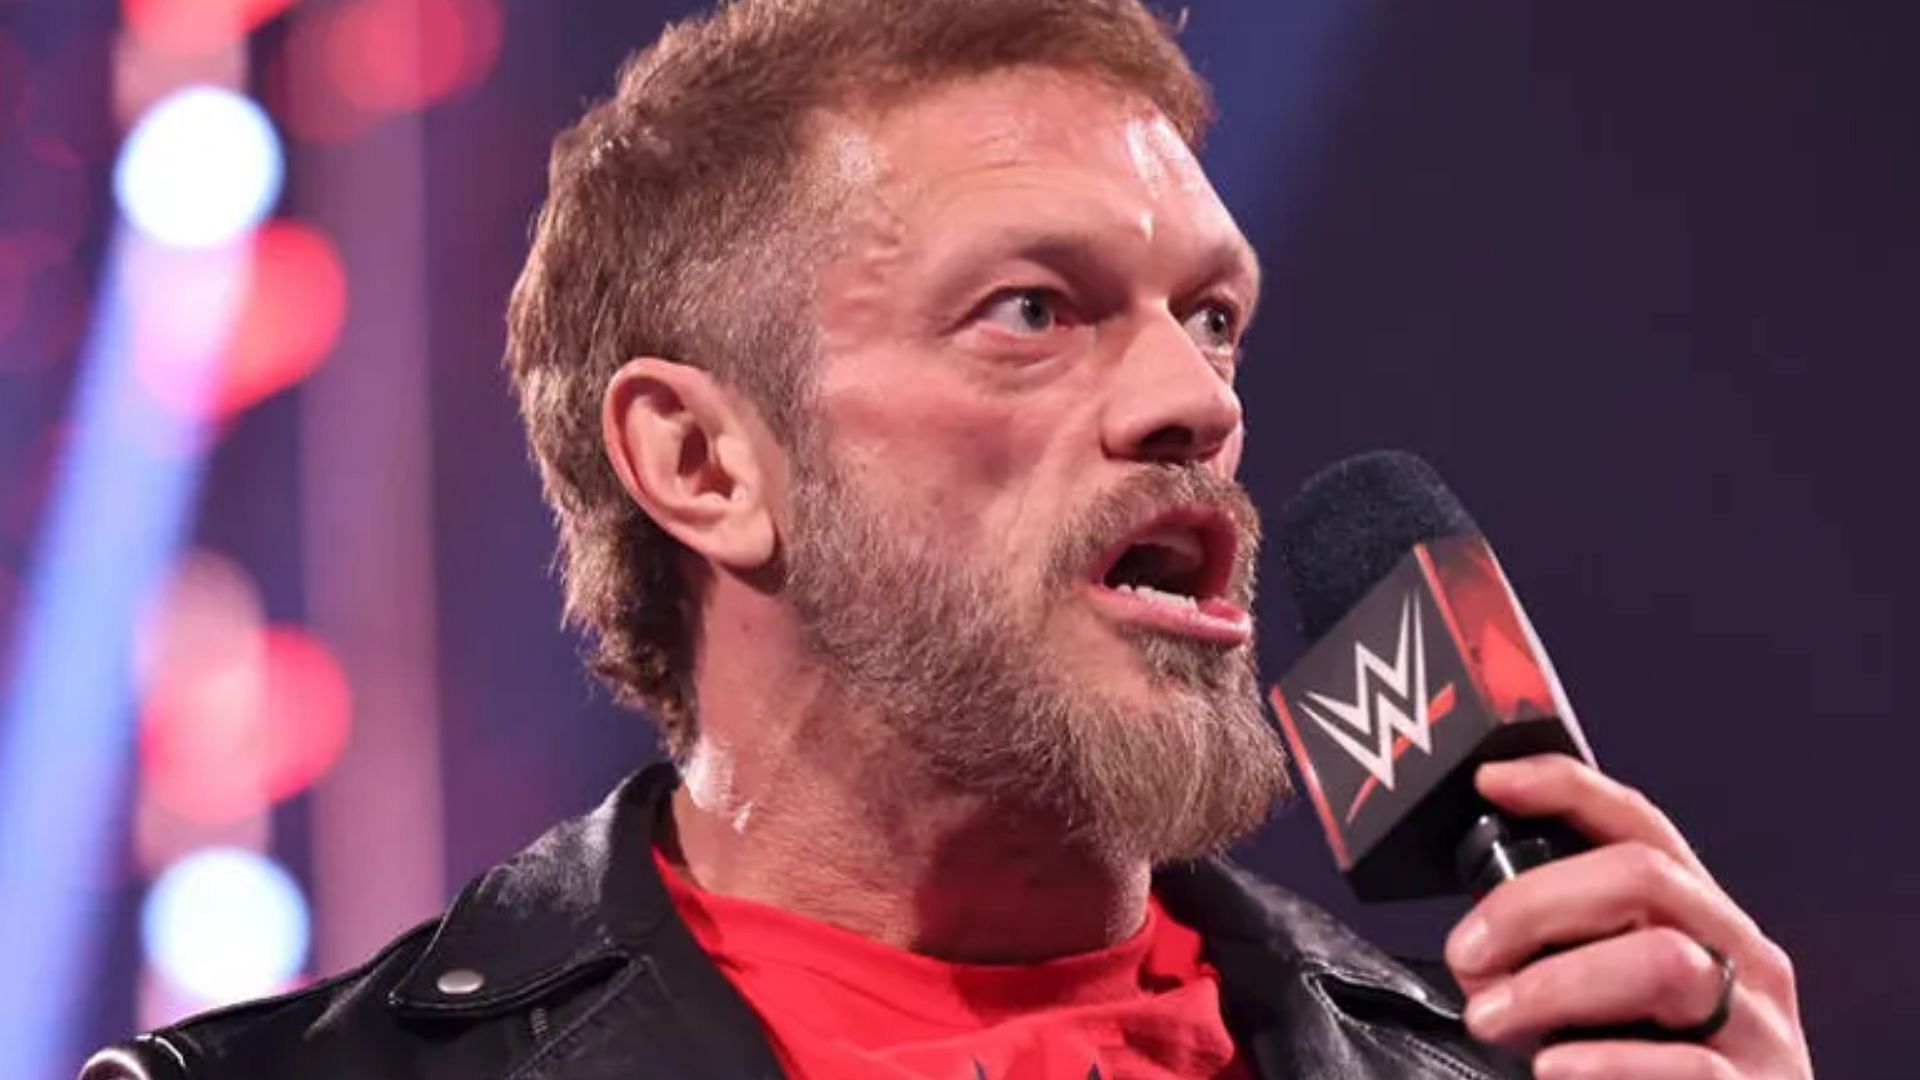 Is WWE Hall of Famer Edge done with the company once and for all?